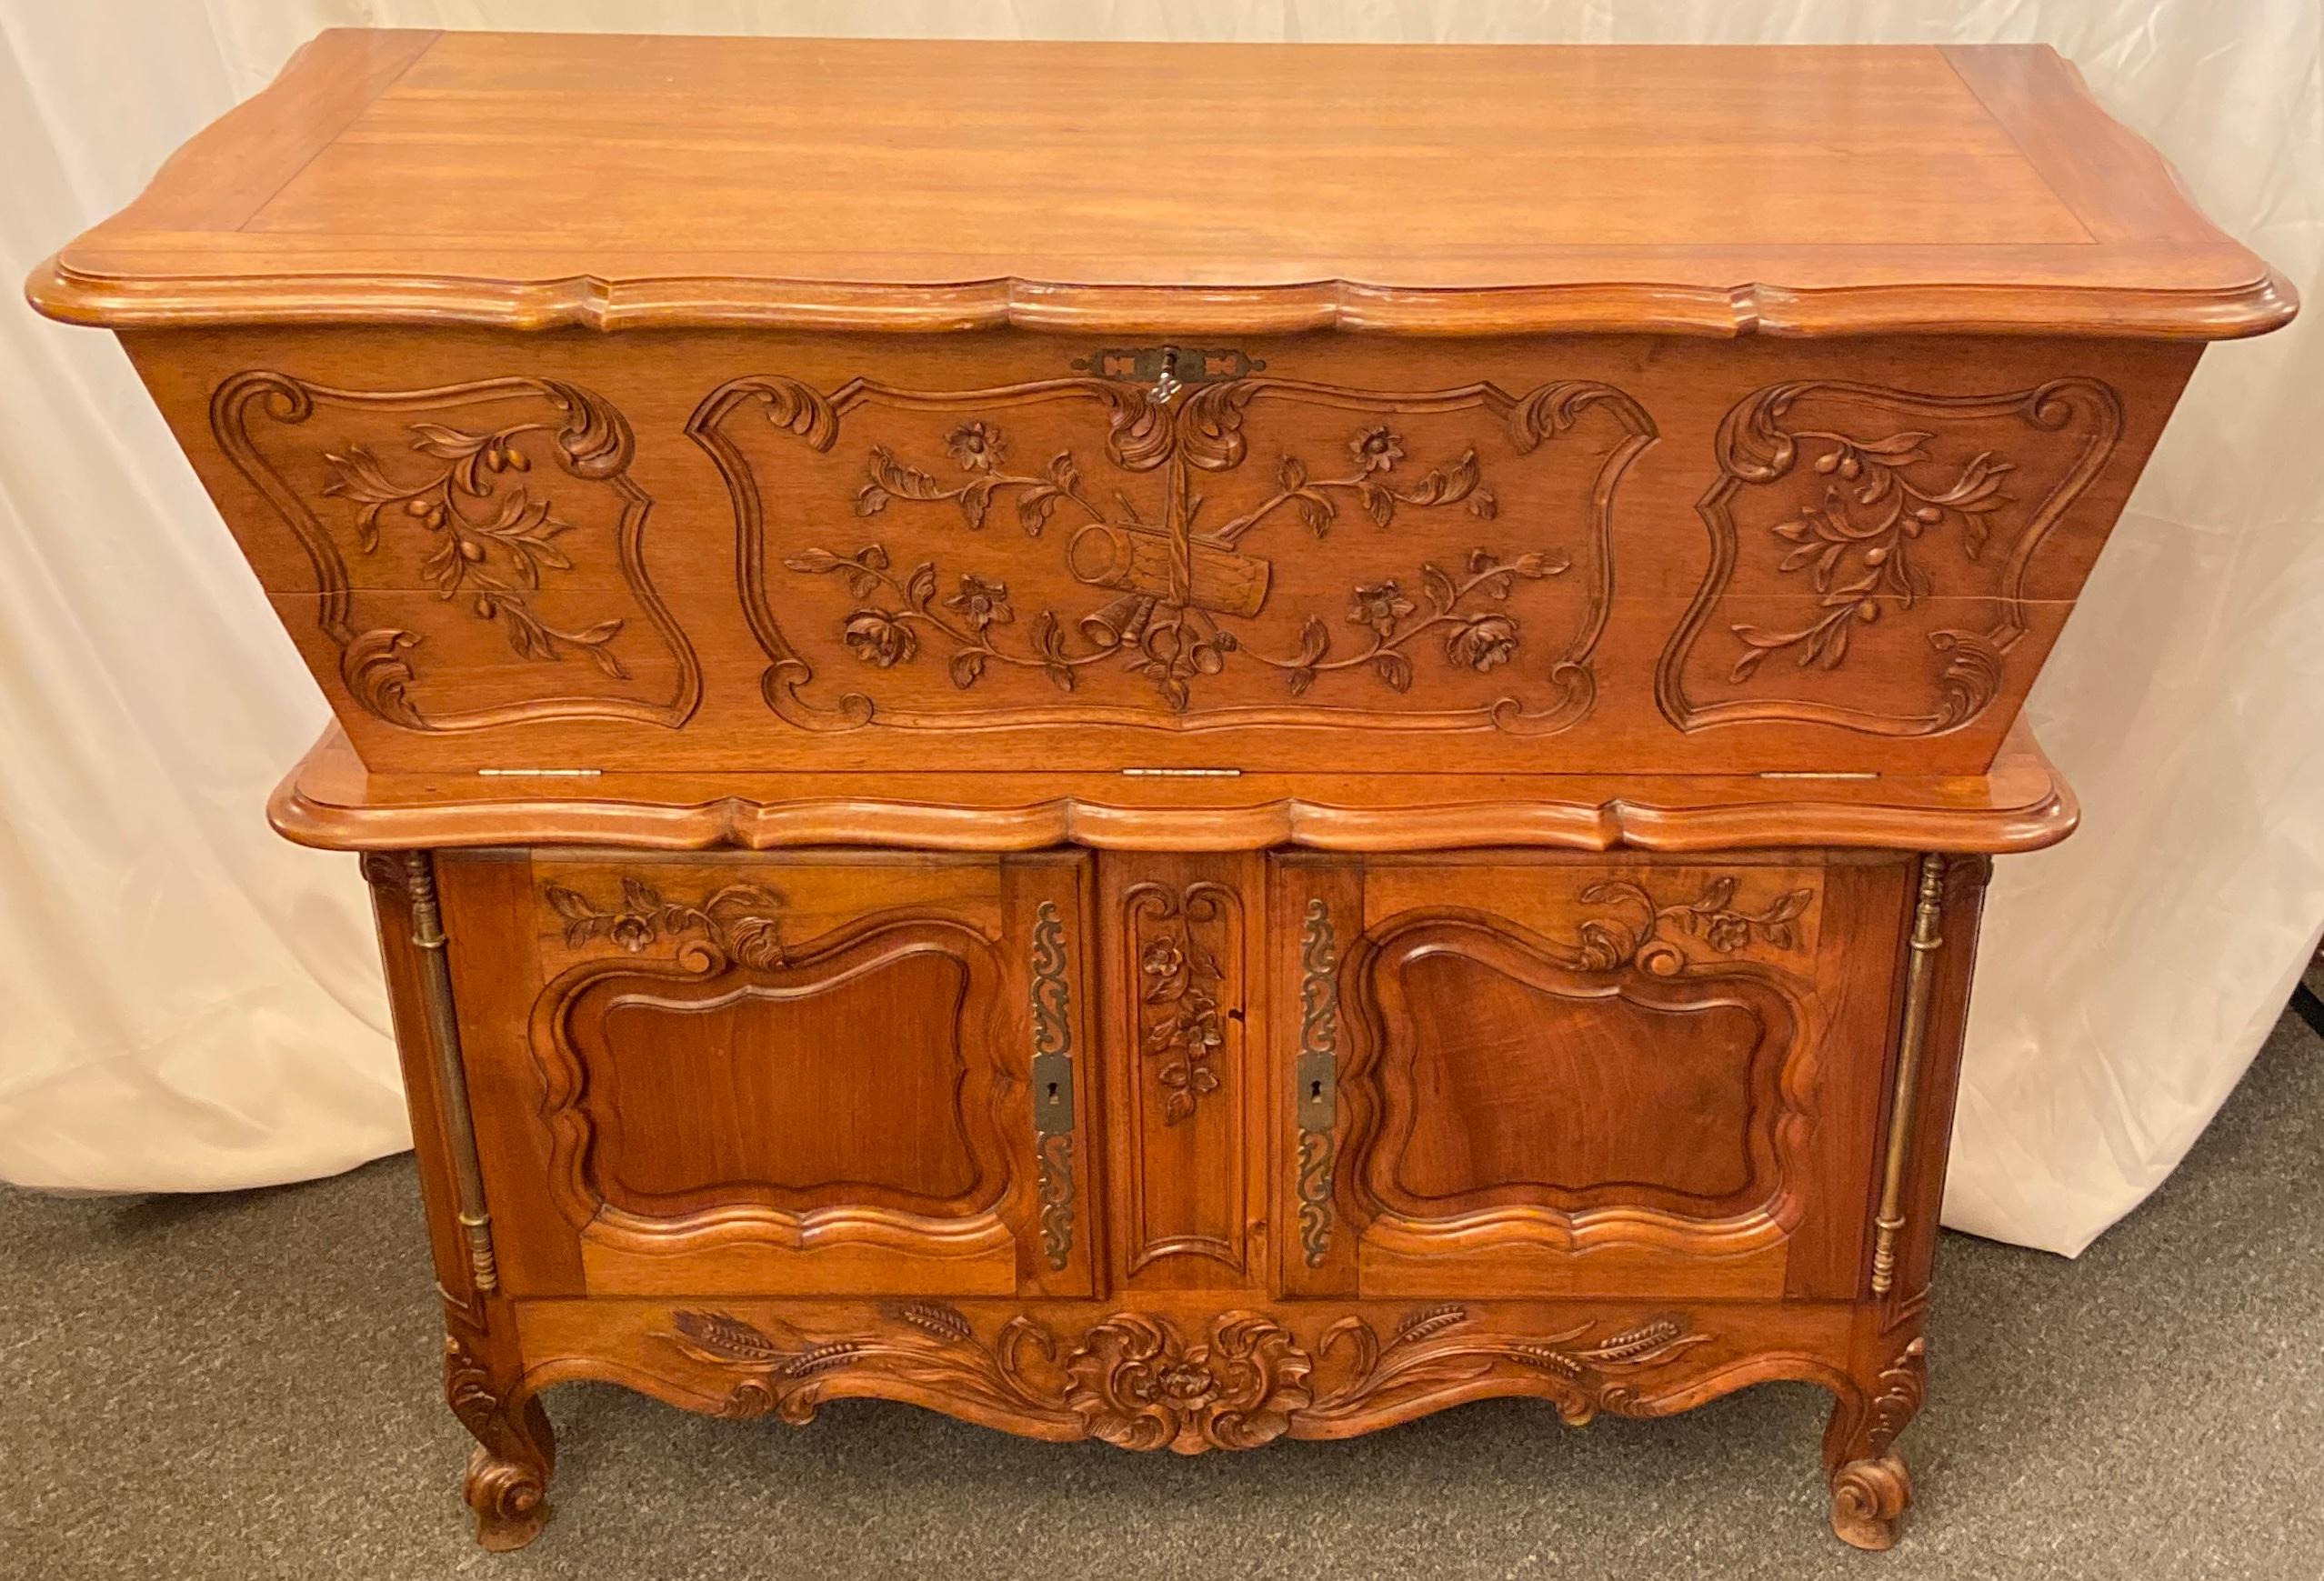 Antique French Provincial carved walnut petrin dough bin table, circa 1900.
A versatile piece, this 